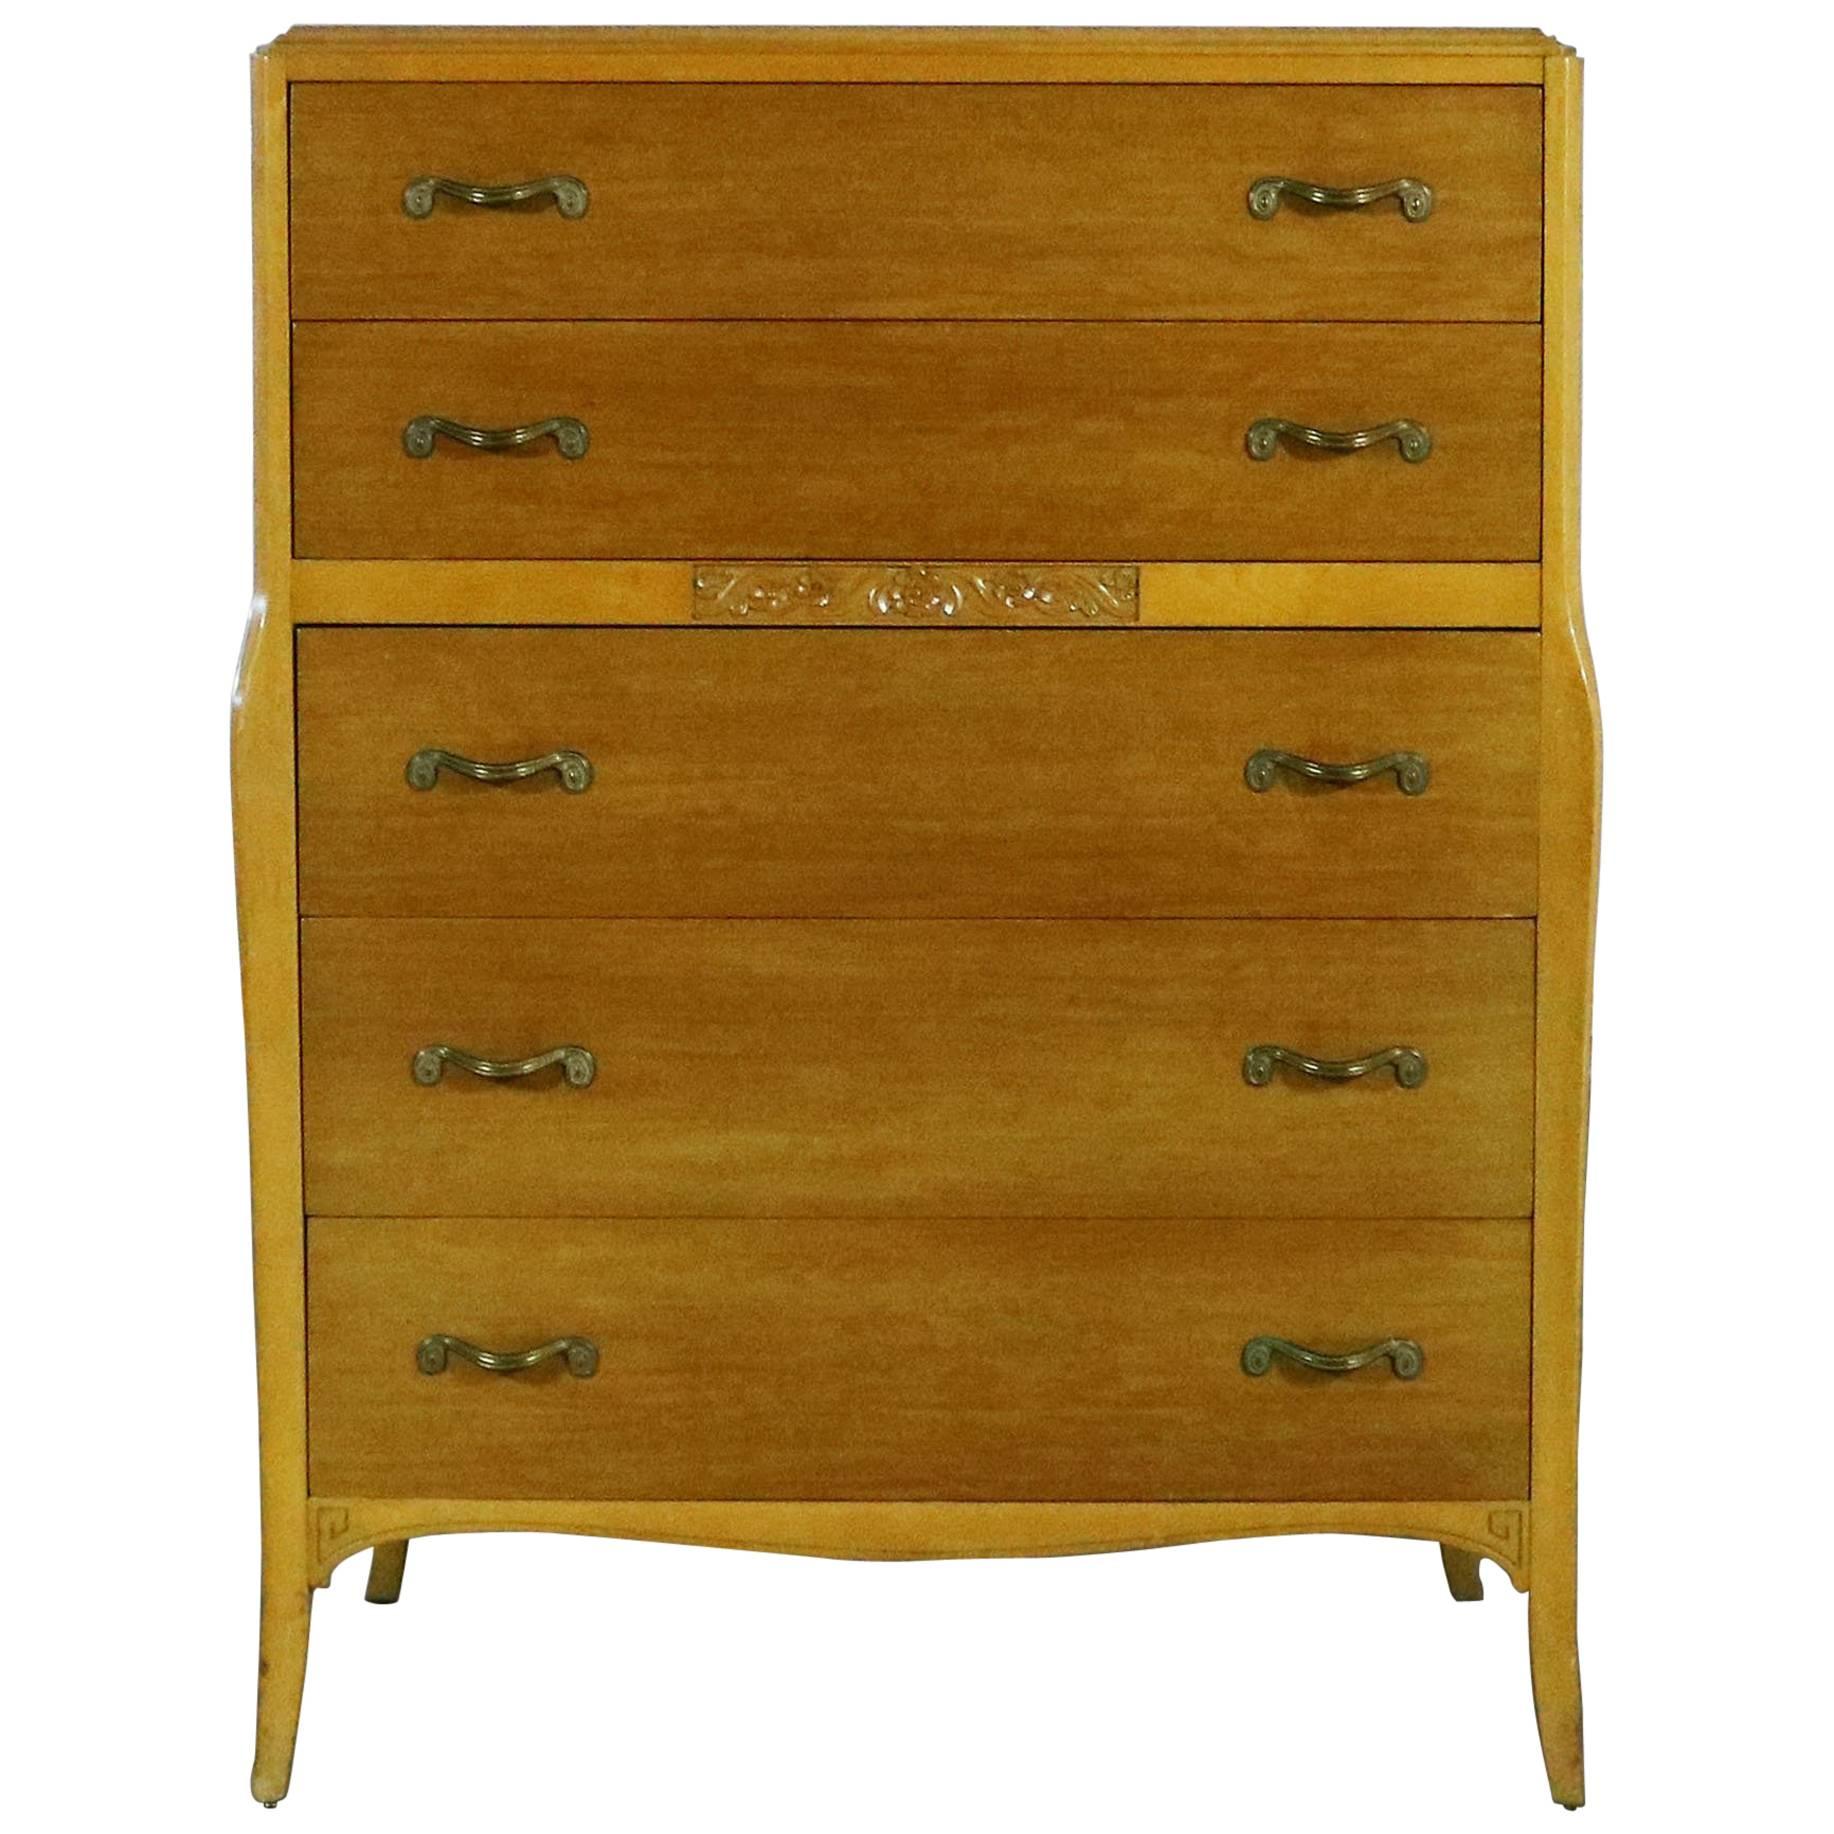 Art Deco Style Tall Chest of Drawers by Rway Northern Furniture Co. of Sheboygan